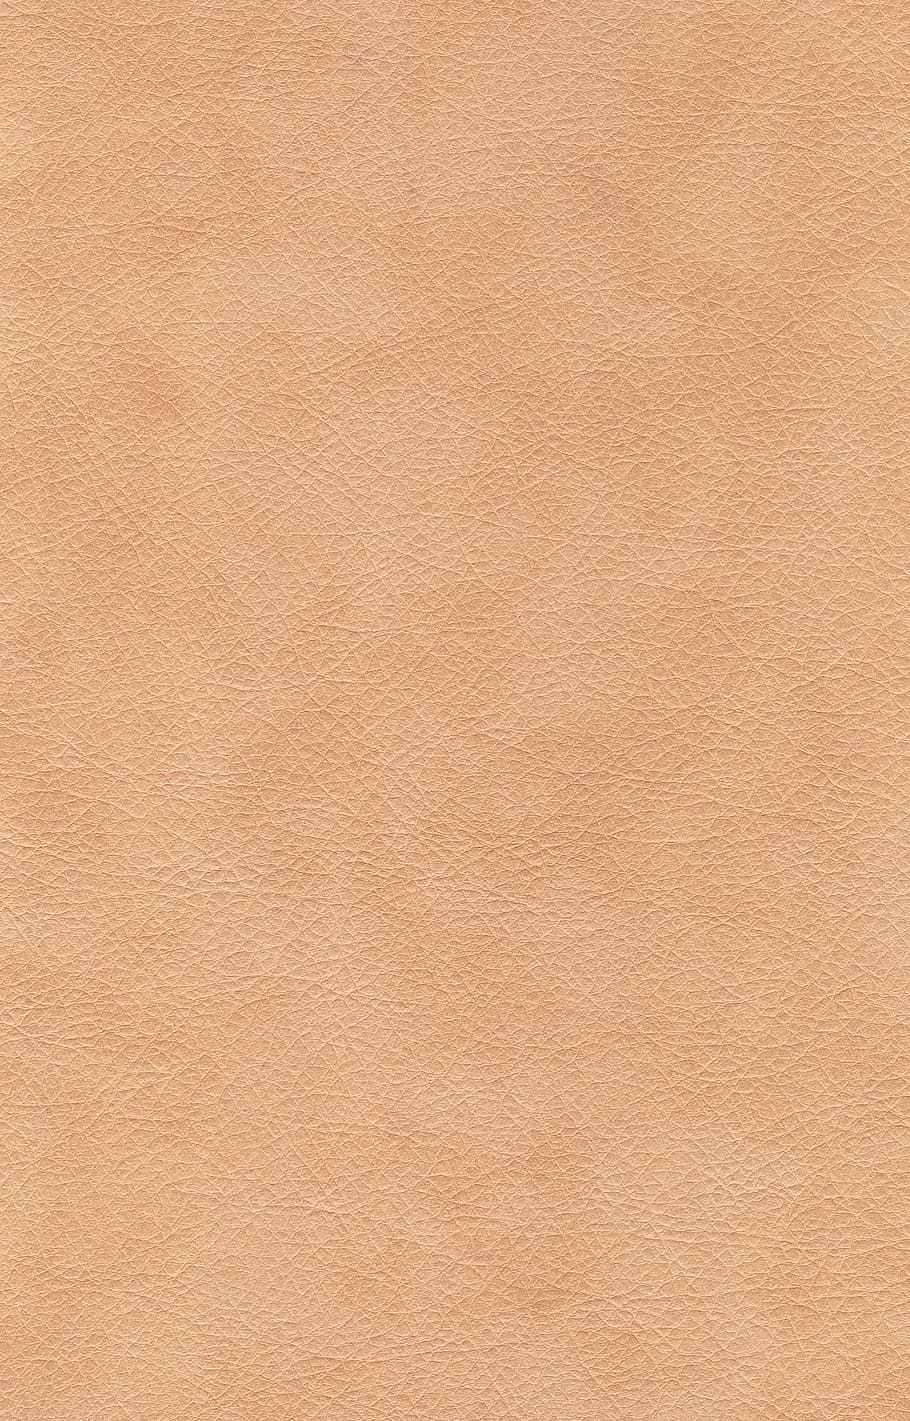 brown leather, leather, textures, background, fabric, raw, decor, material, pattern, art